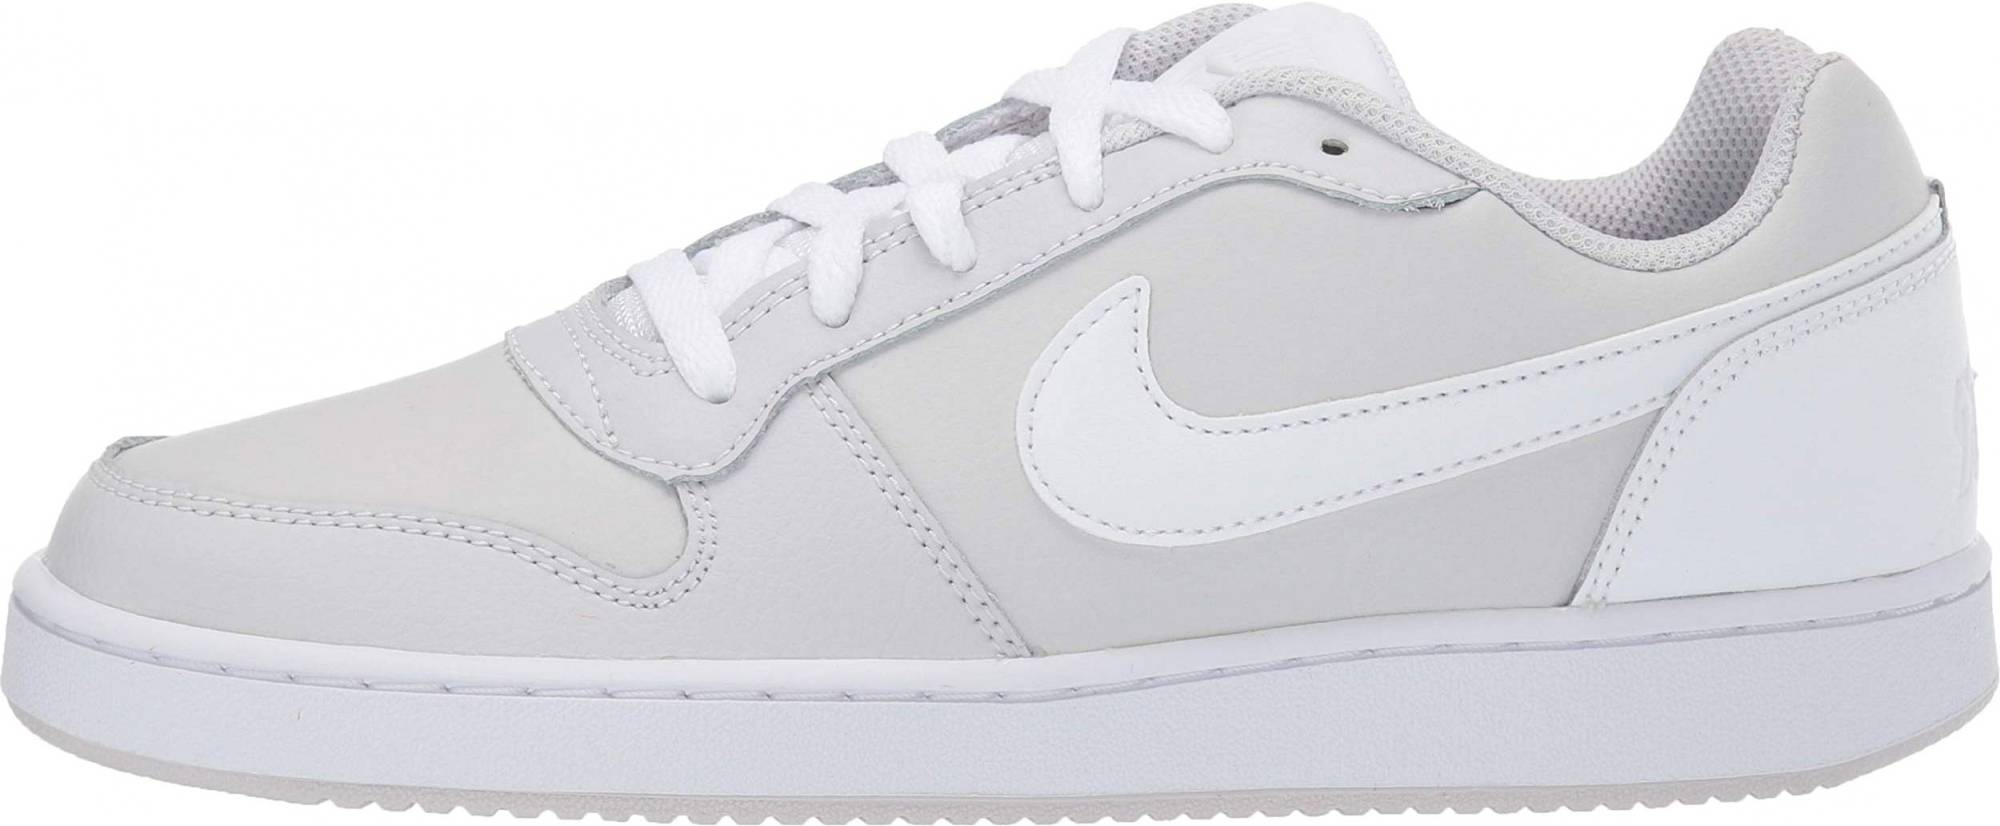 Nike Ebernon Low – Shoes Reviews & Reasons To Buy